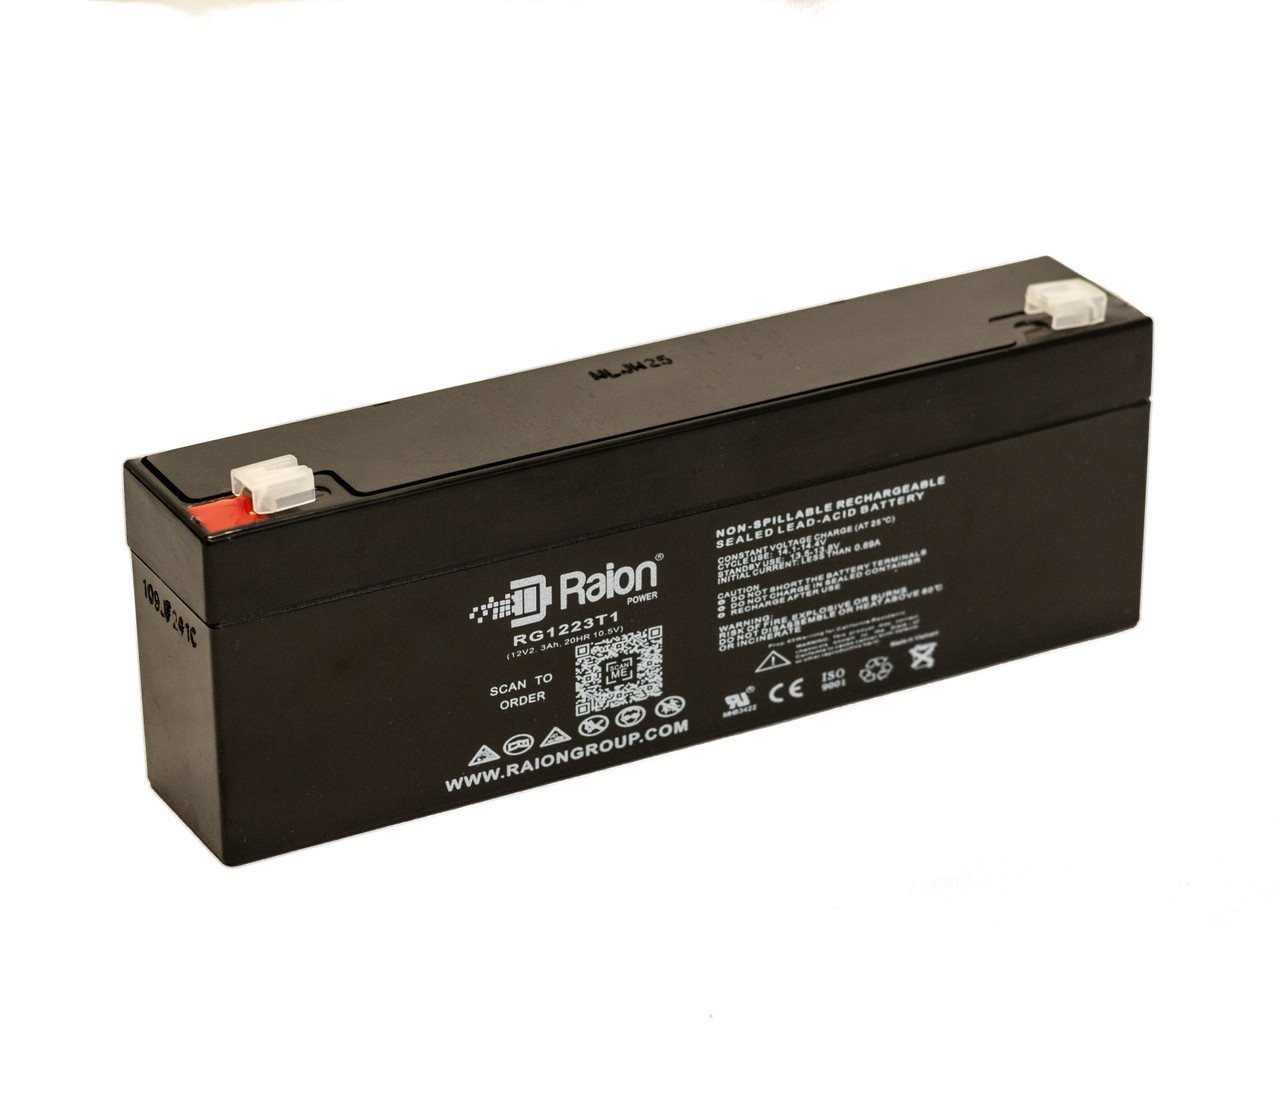 Raion Power RG1223T1 Replacement Battery for TLV1226F1